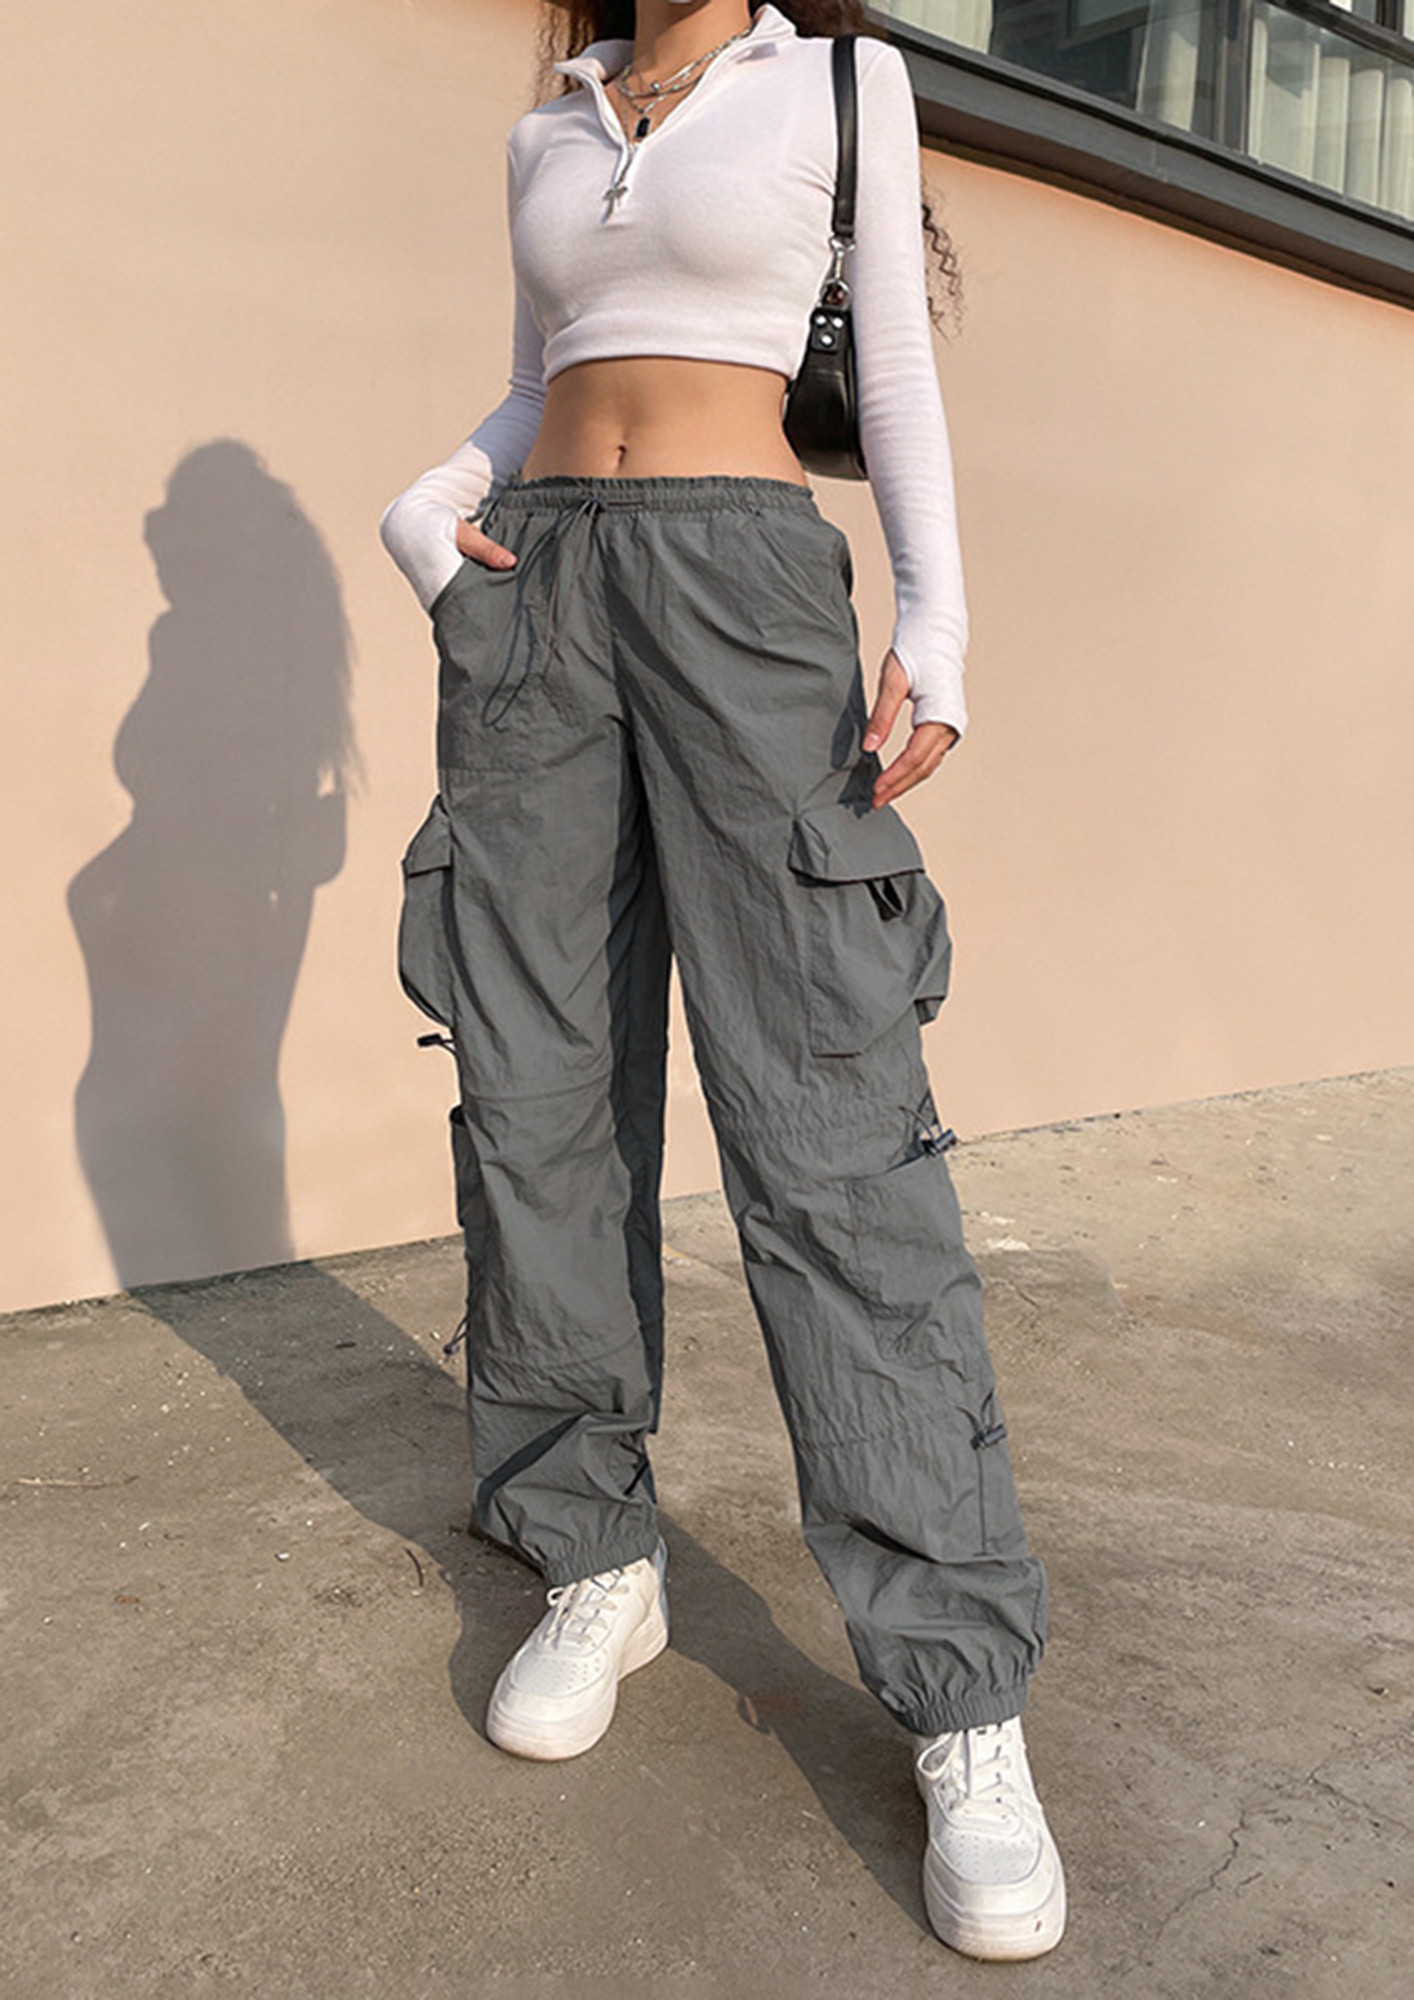 Highlight more than 152 cargo pants for women latest